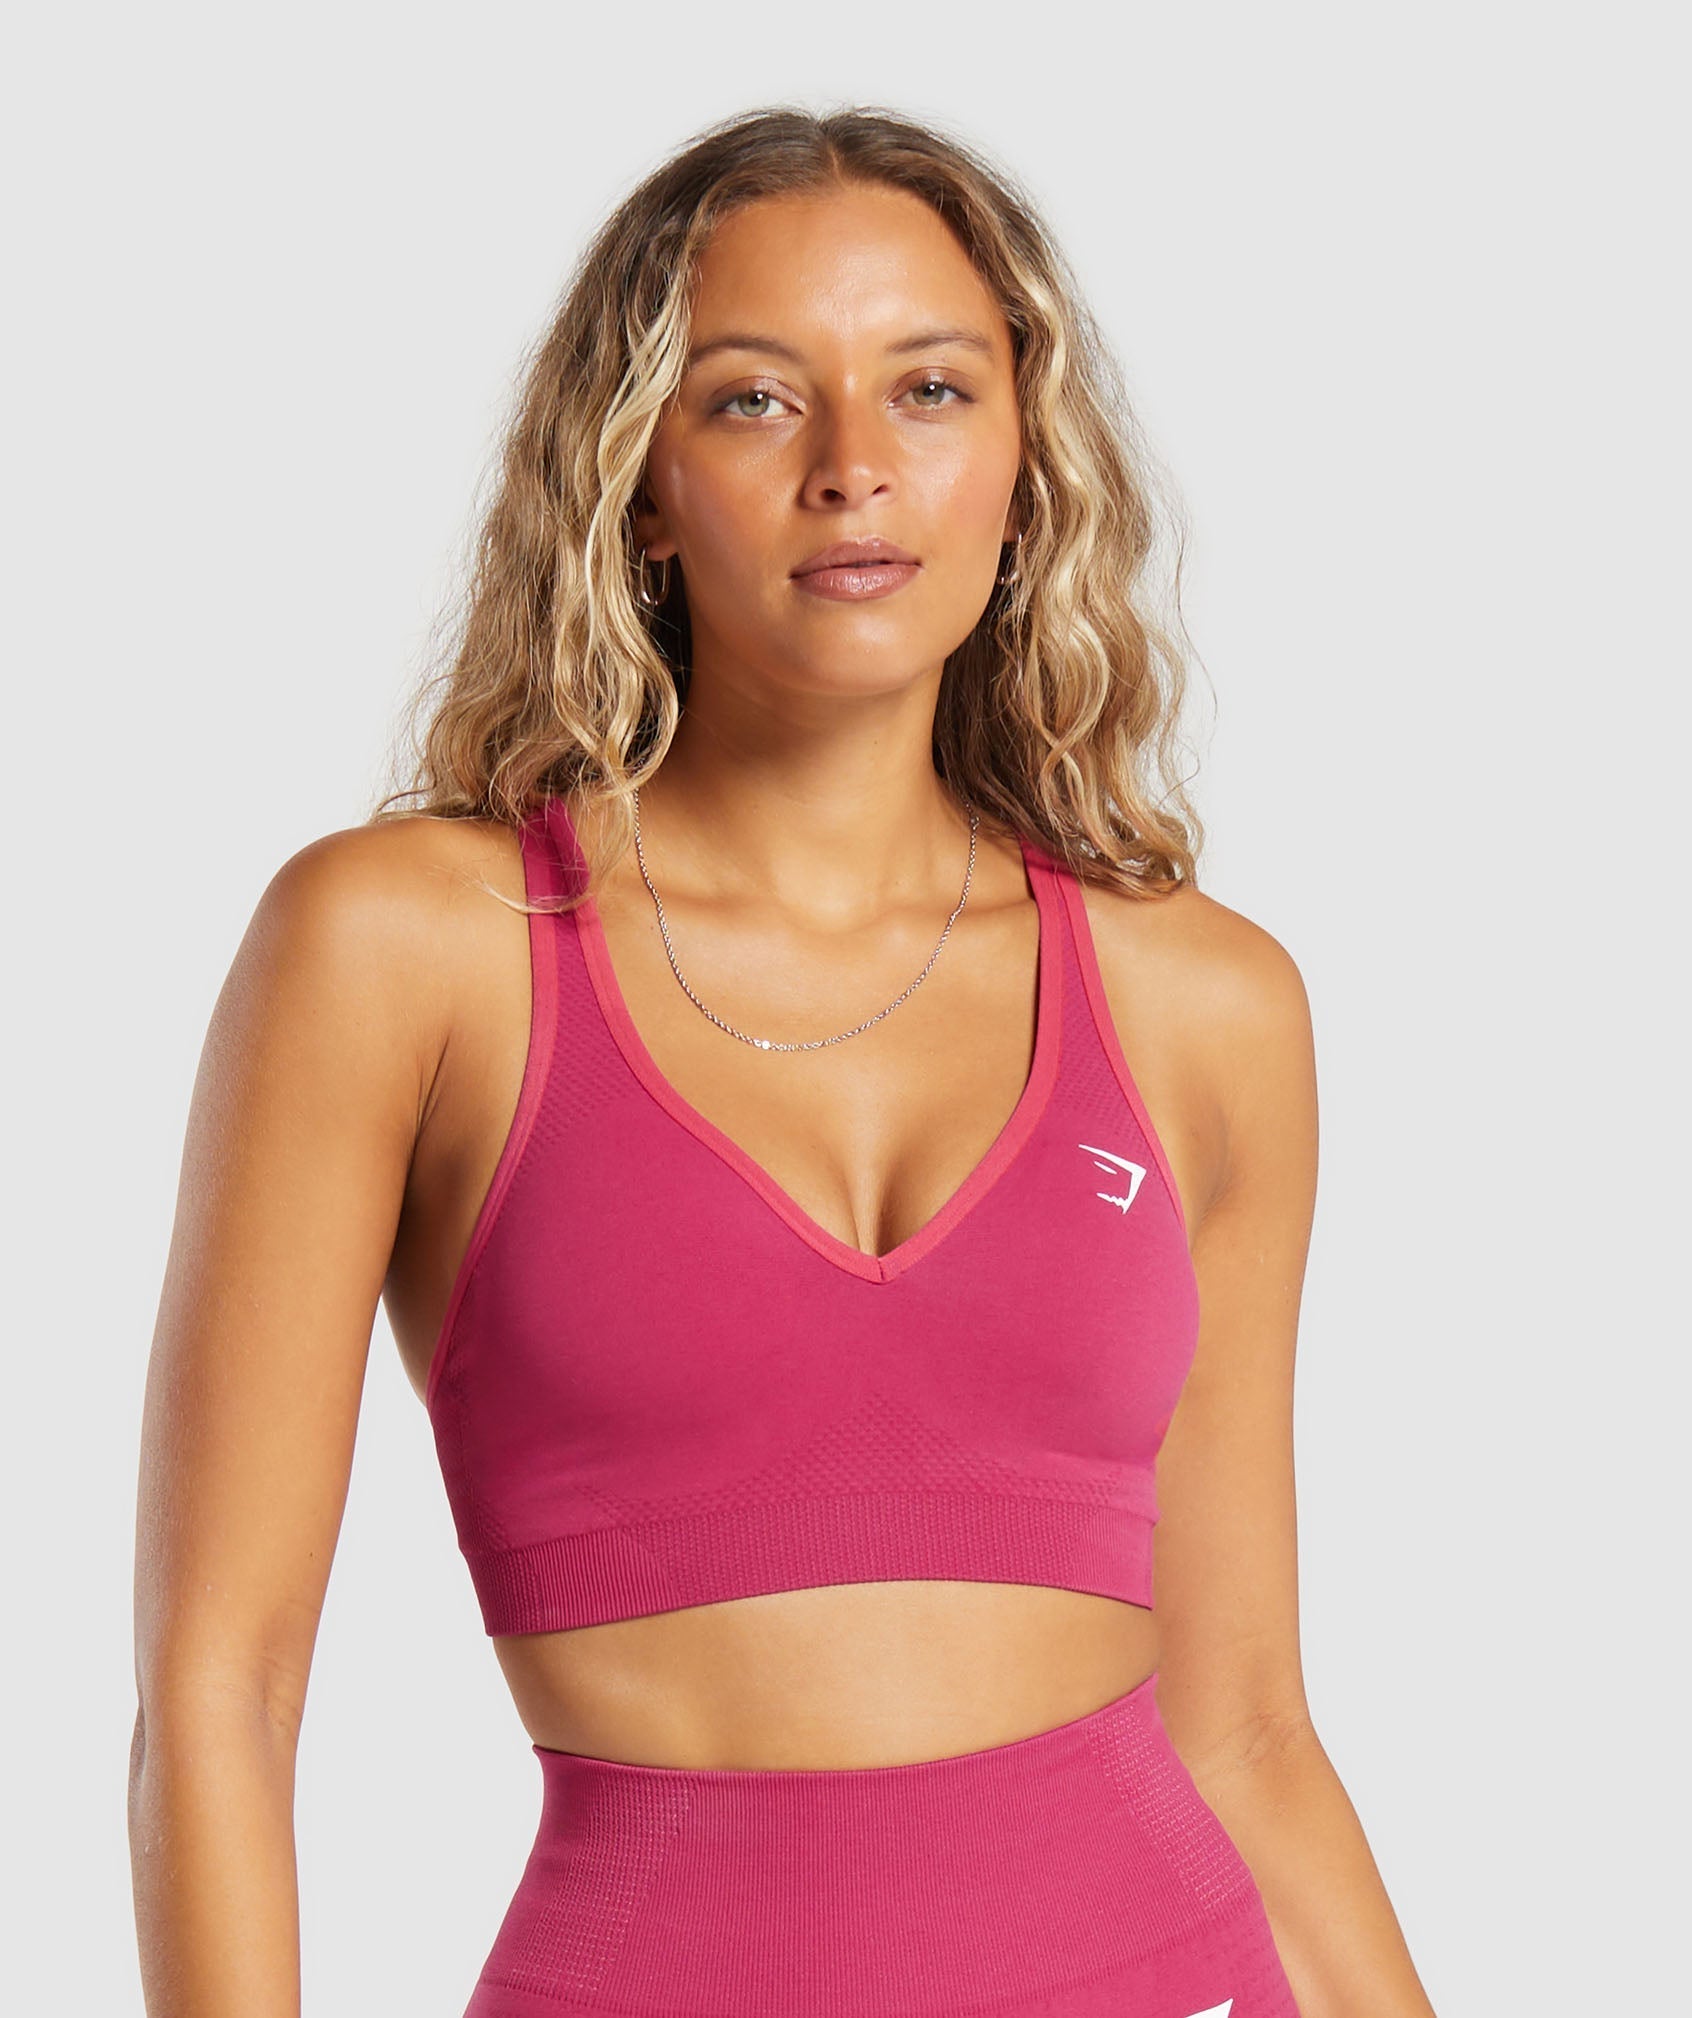 Vital Seamless 2.0 V Neck Sports Bra in Vintage Pink/Marl is out of stock